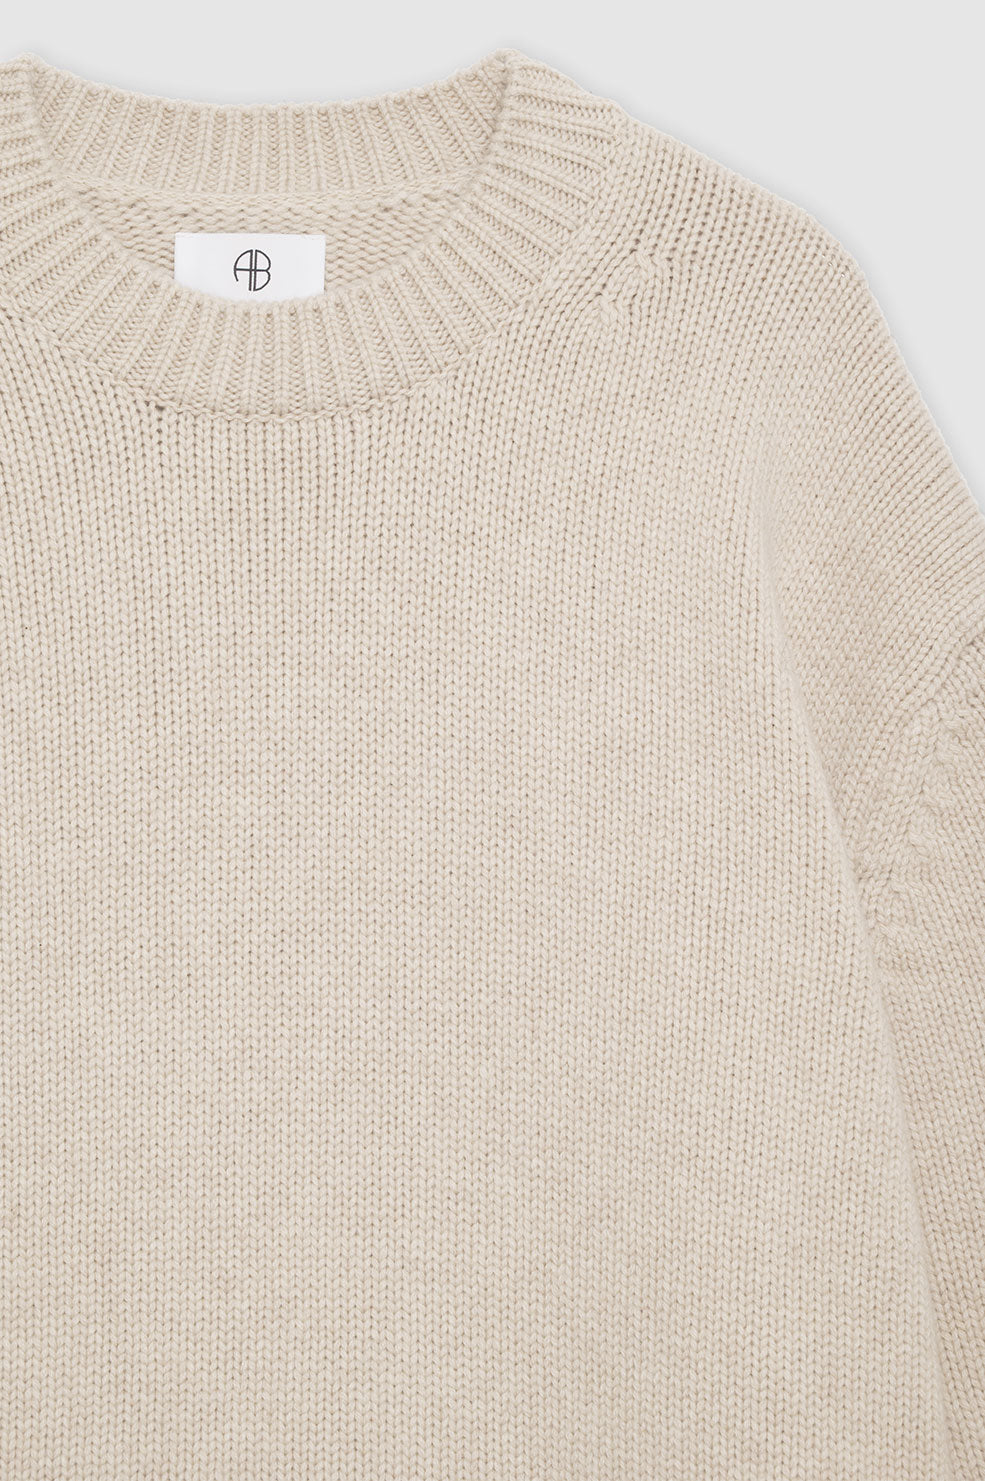 ANINE BING Rosie Cashmere Sweater - Oatmeal - detail View